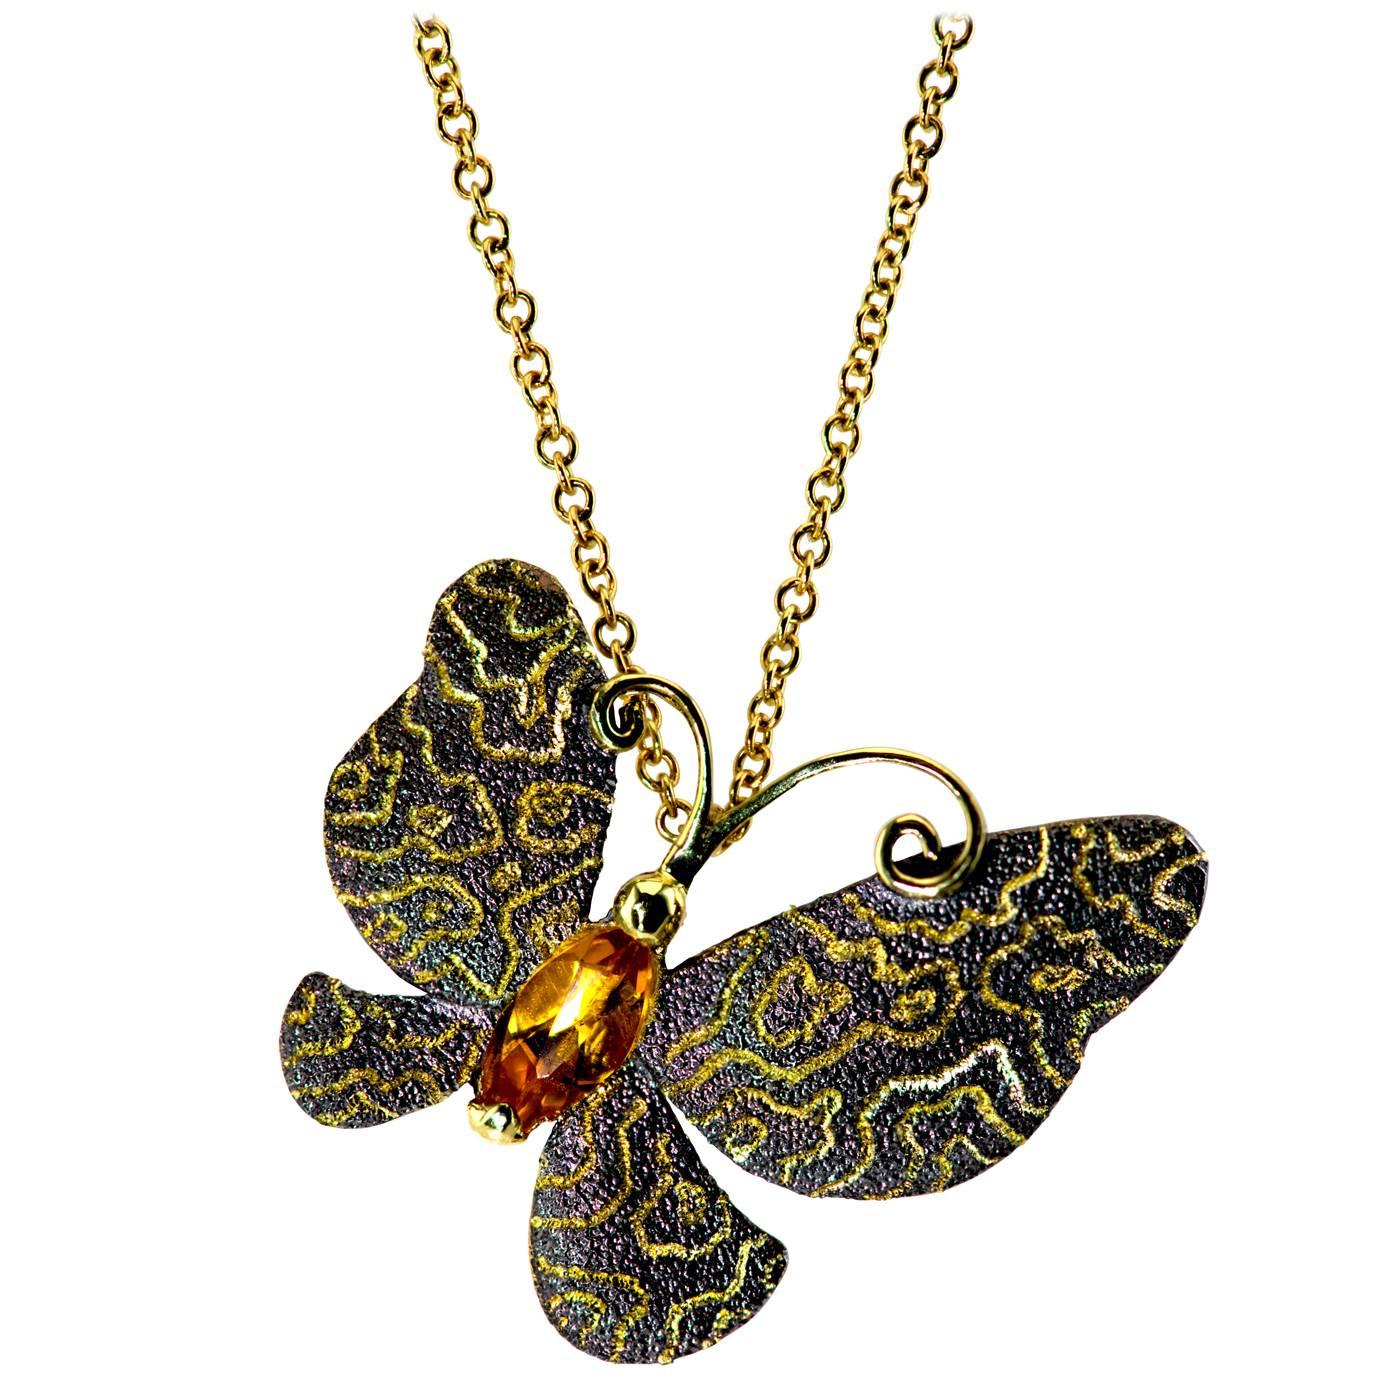 Alex Soldier Citrine Yellow Gold Butterfly Pendant Necklace Pin On Gold Chain 